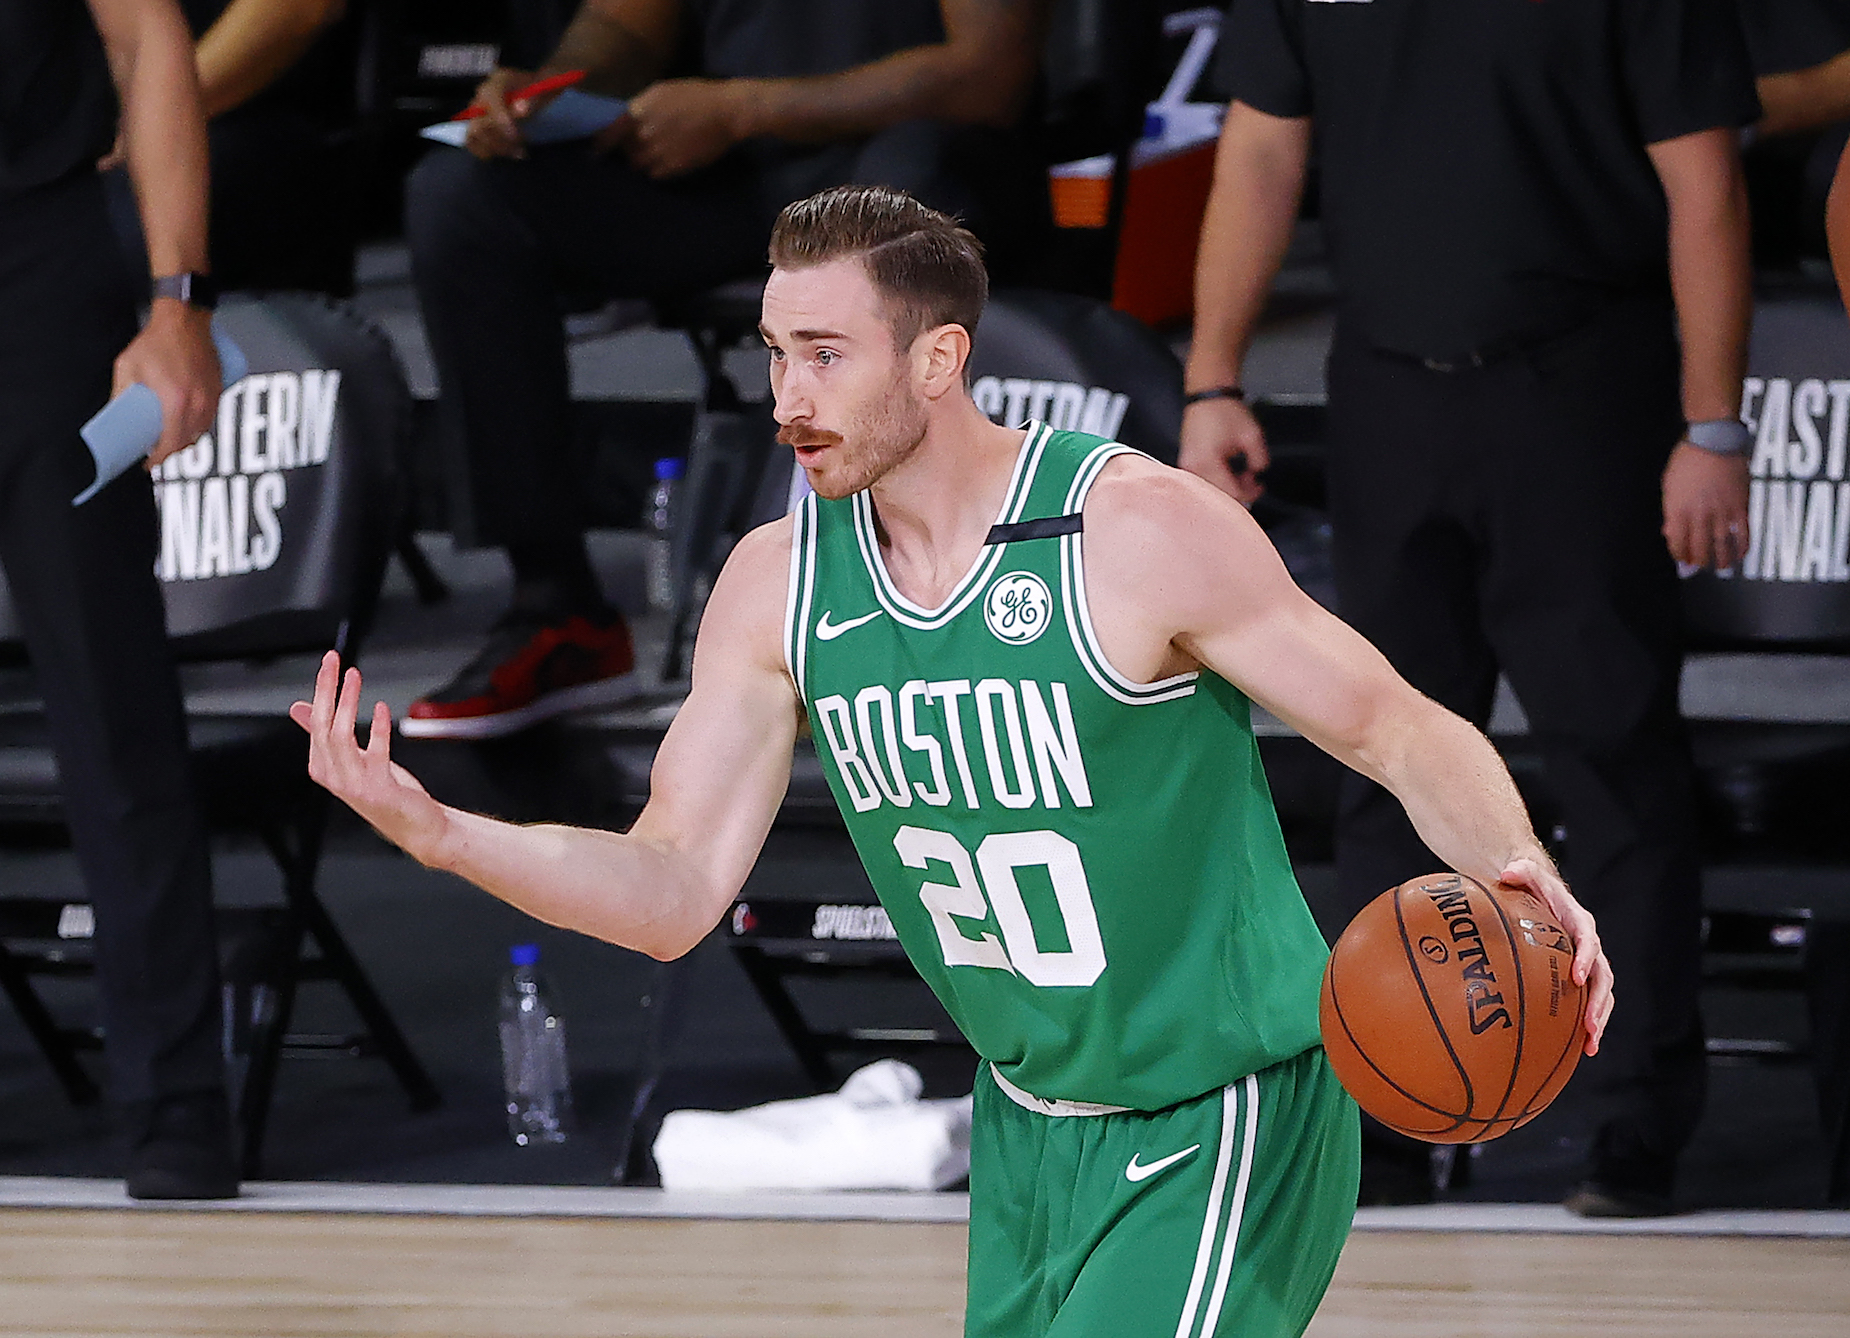 Gordon Hayward recently inked a $120 million deal, but plays for God, not the money.